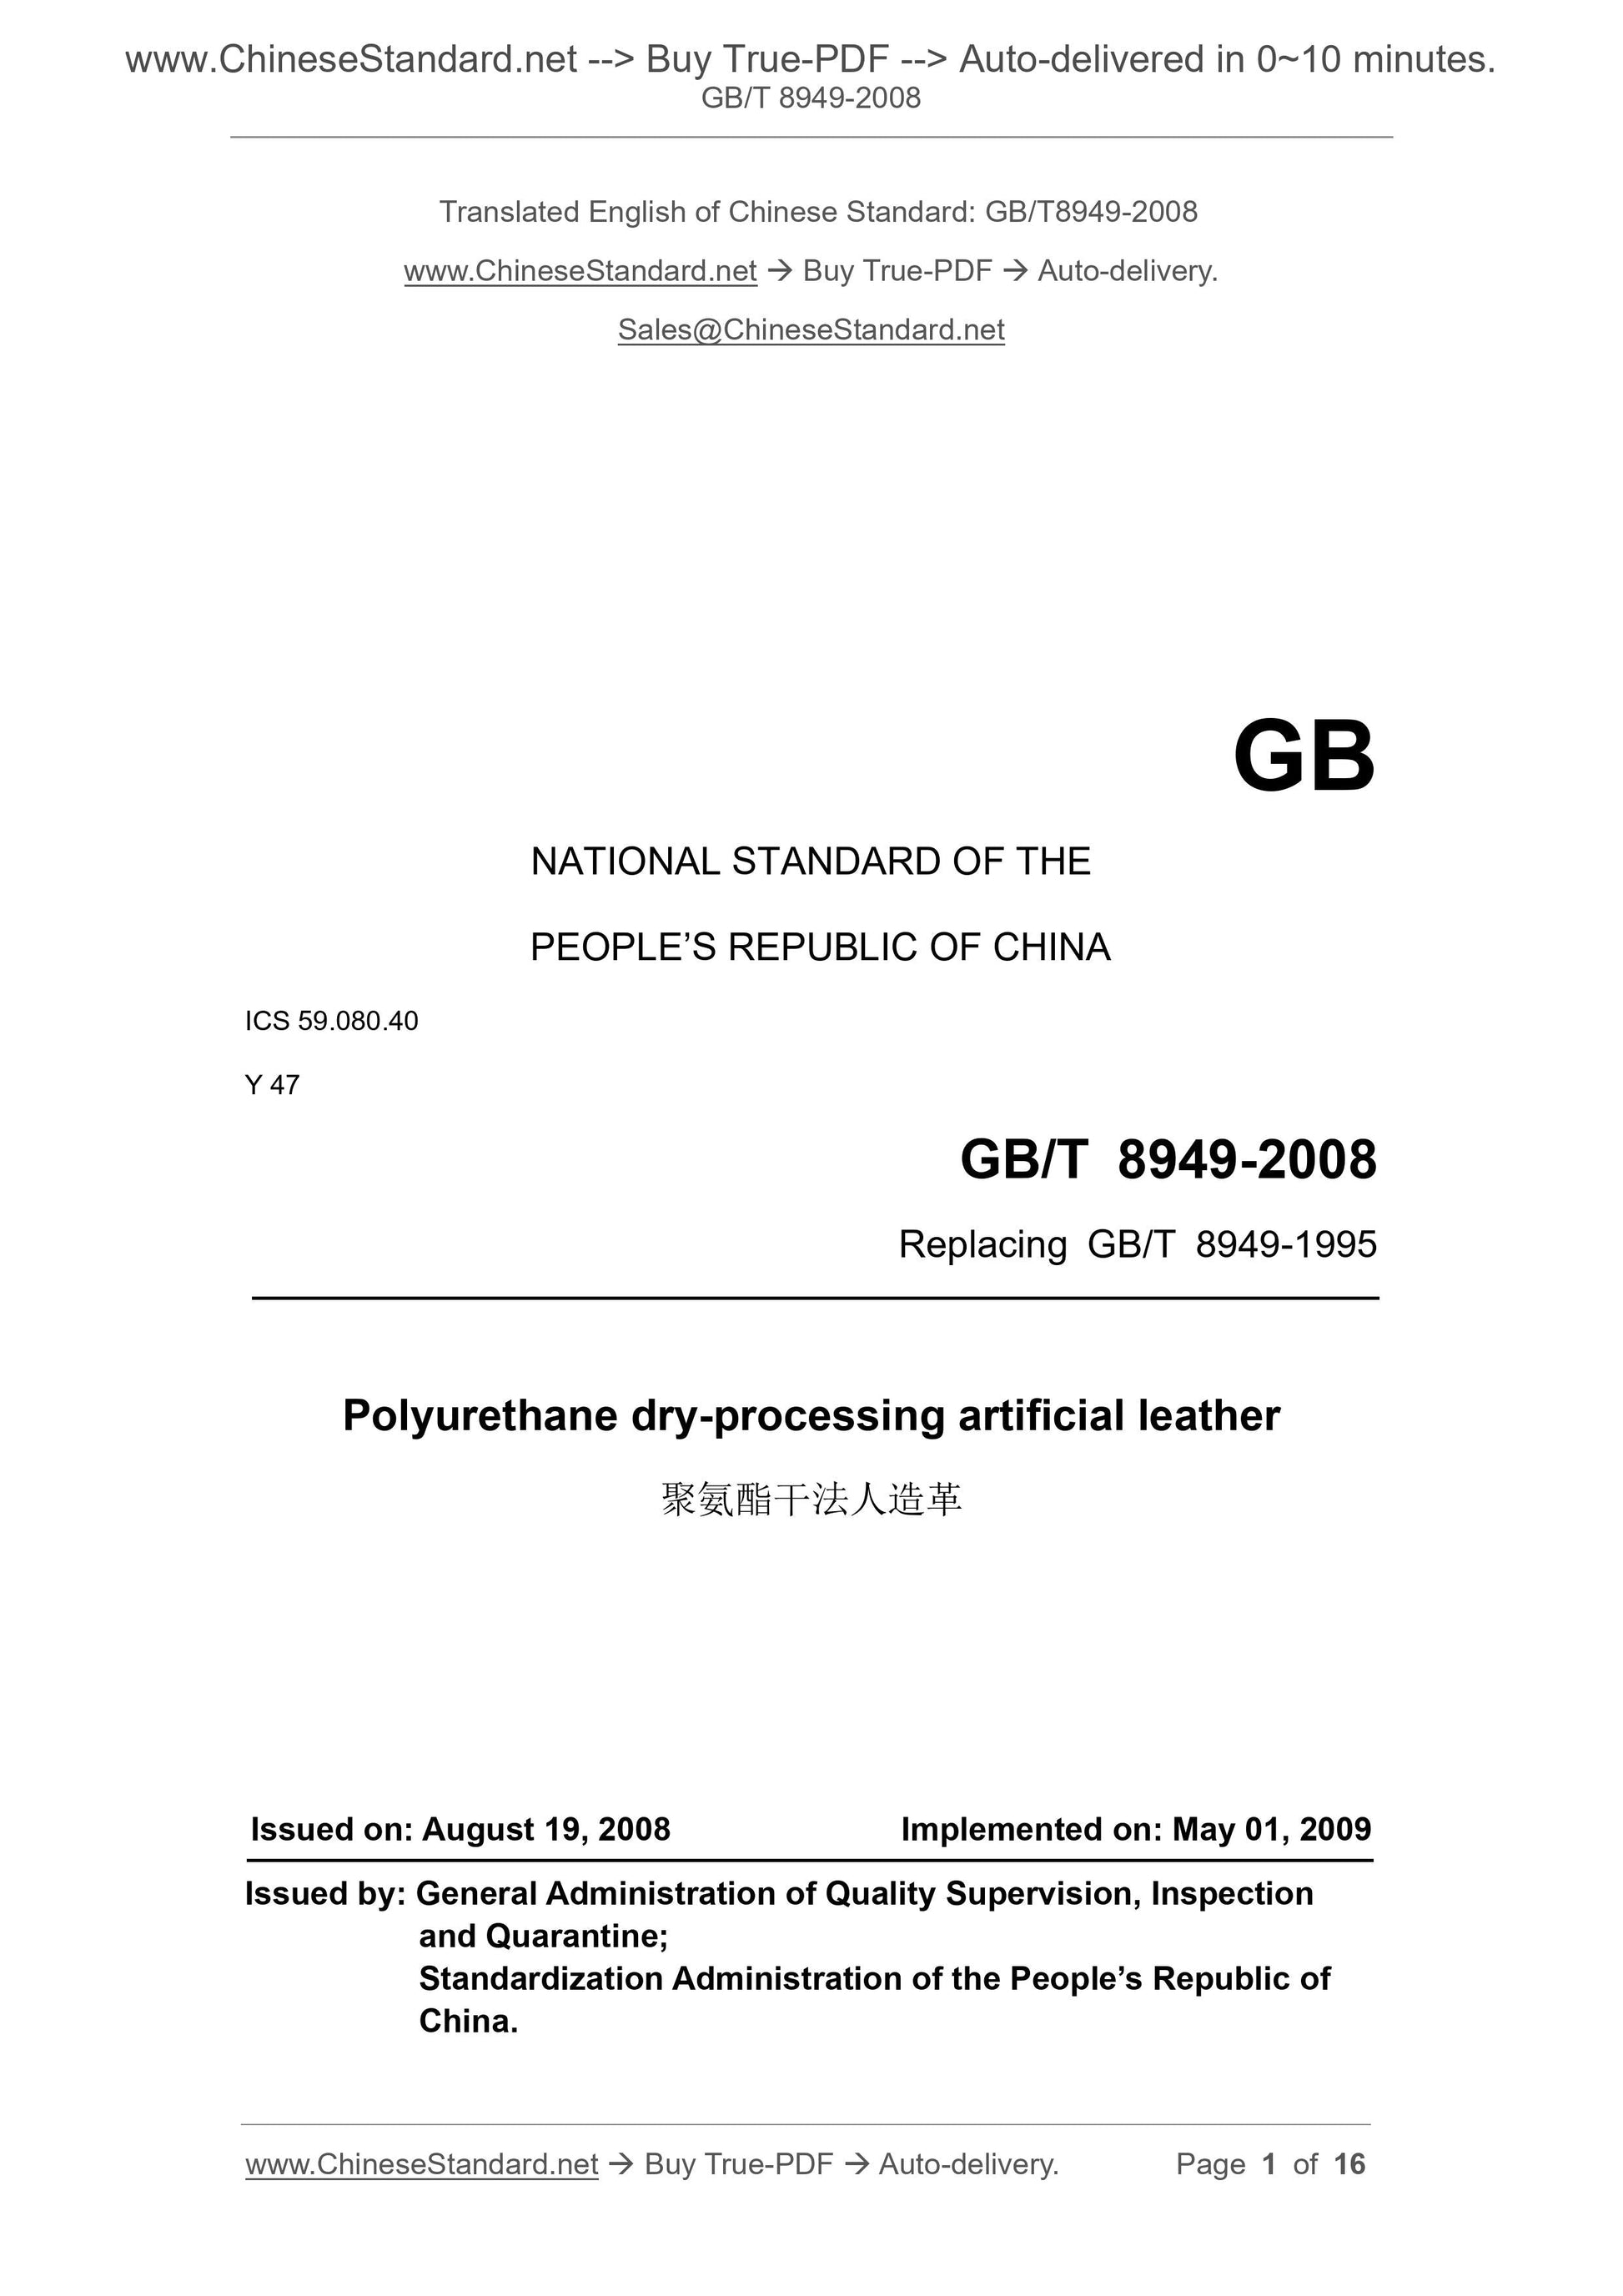 GB/T 8949-2008 Page 1